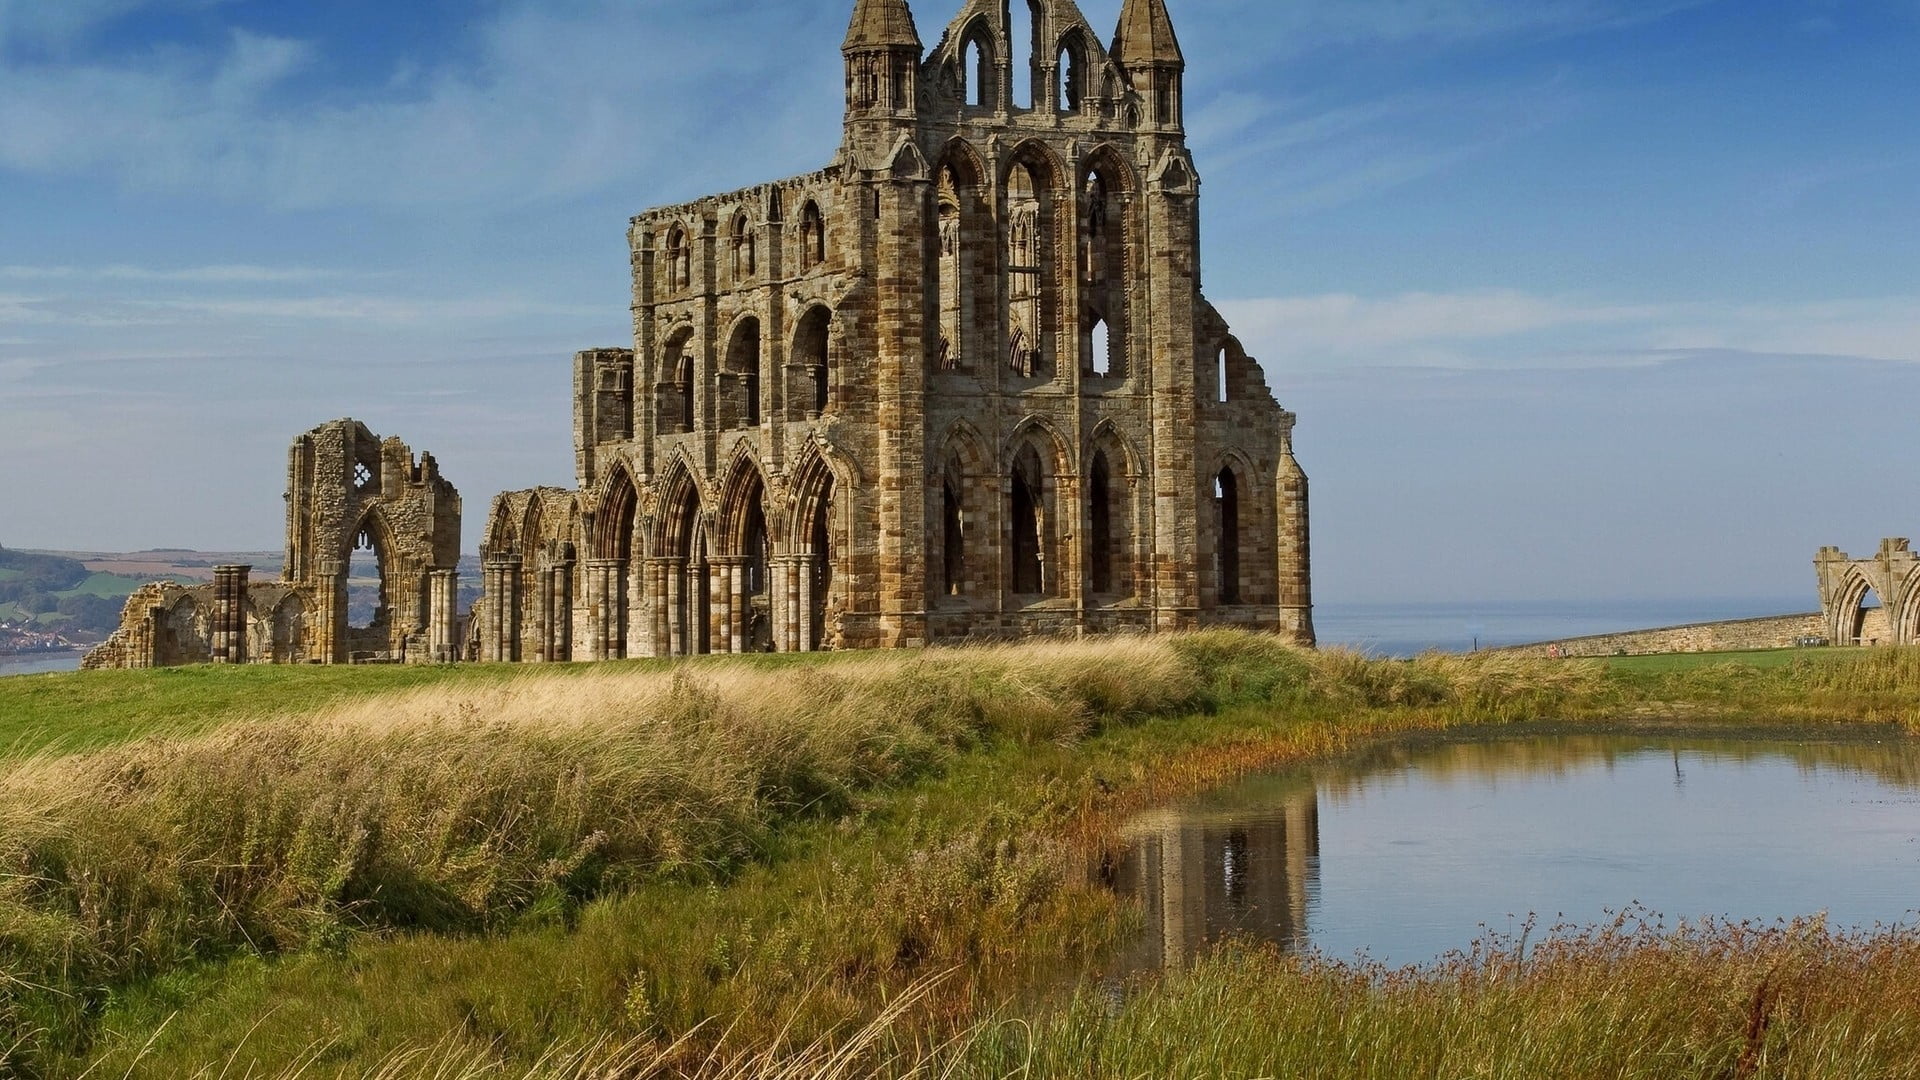 brown castle, cityscape, building, England, Whitby Abbey, architecture